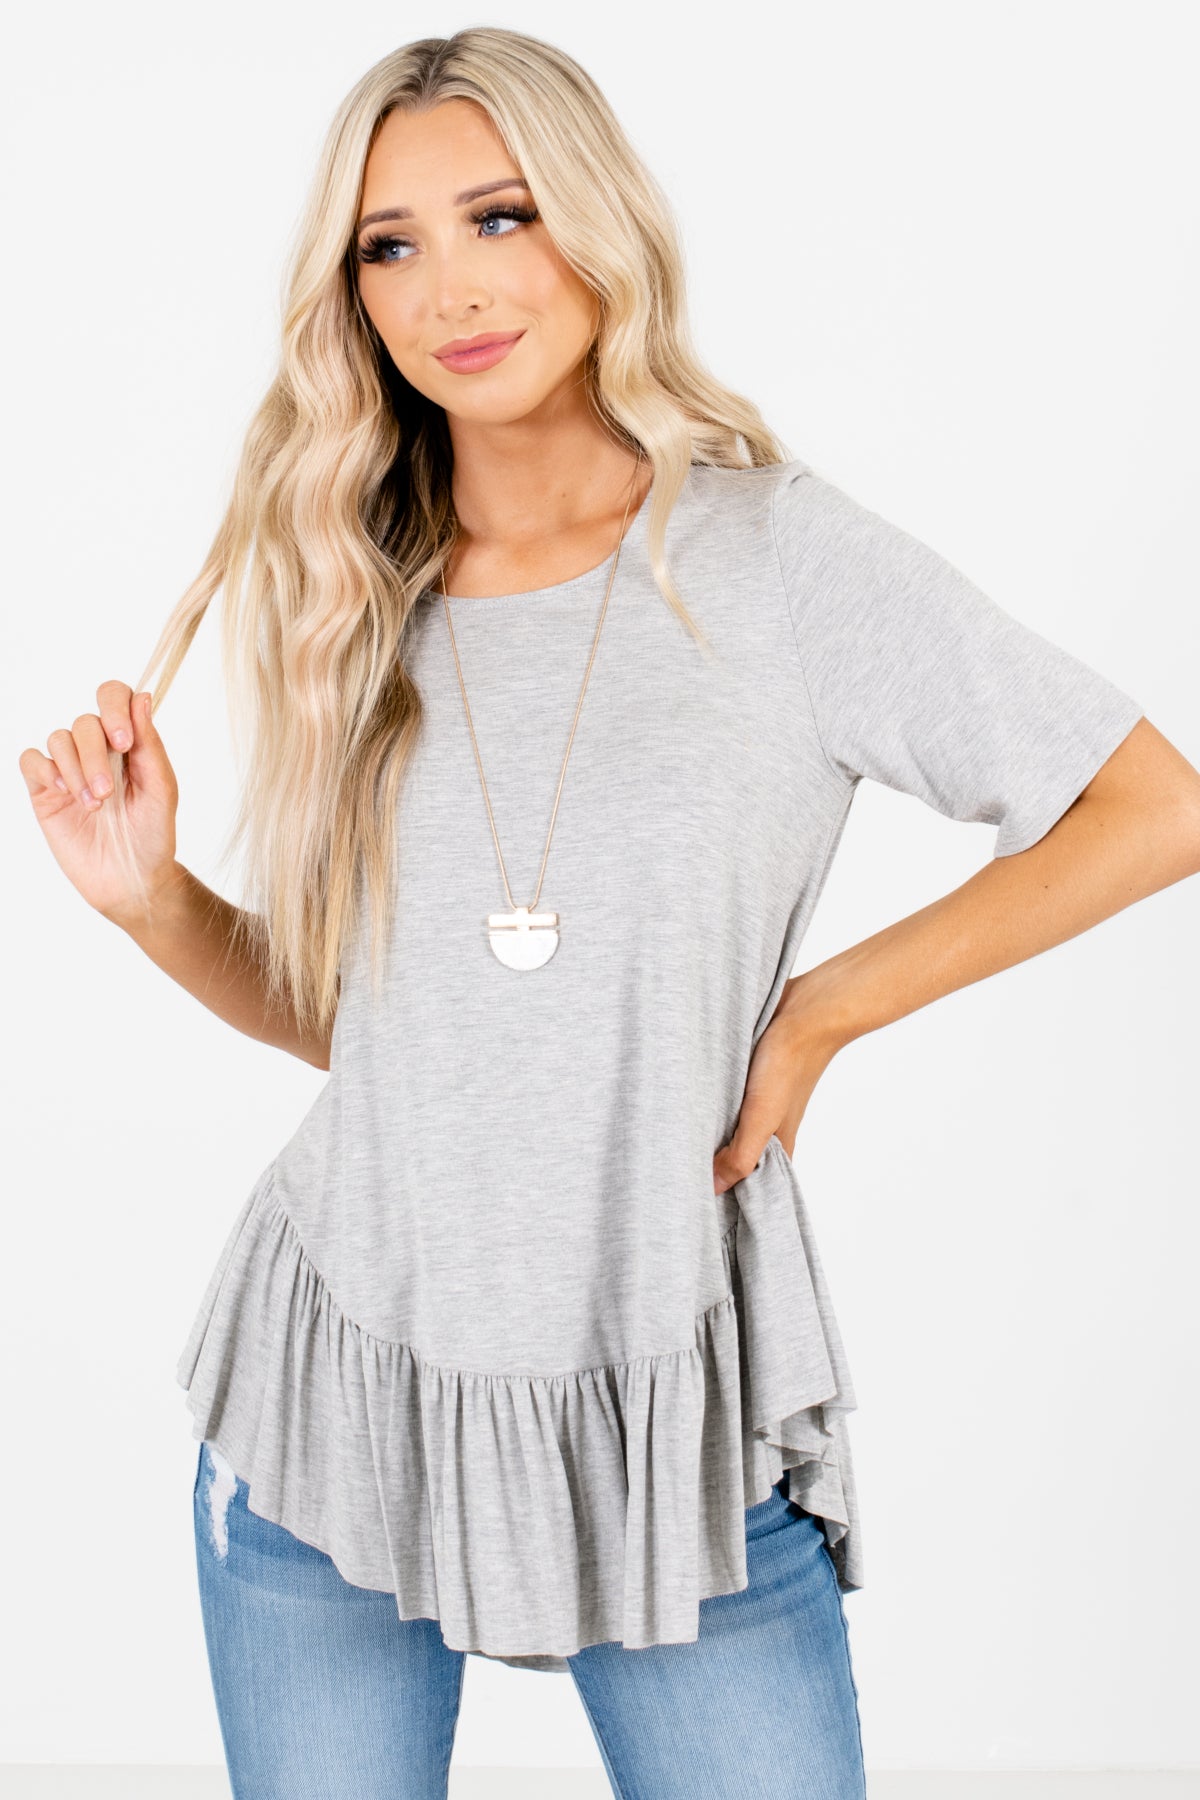 Gray Cute and Comfortable Boutique Tops for Women